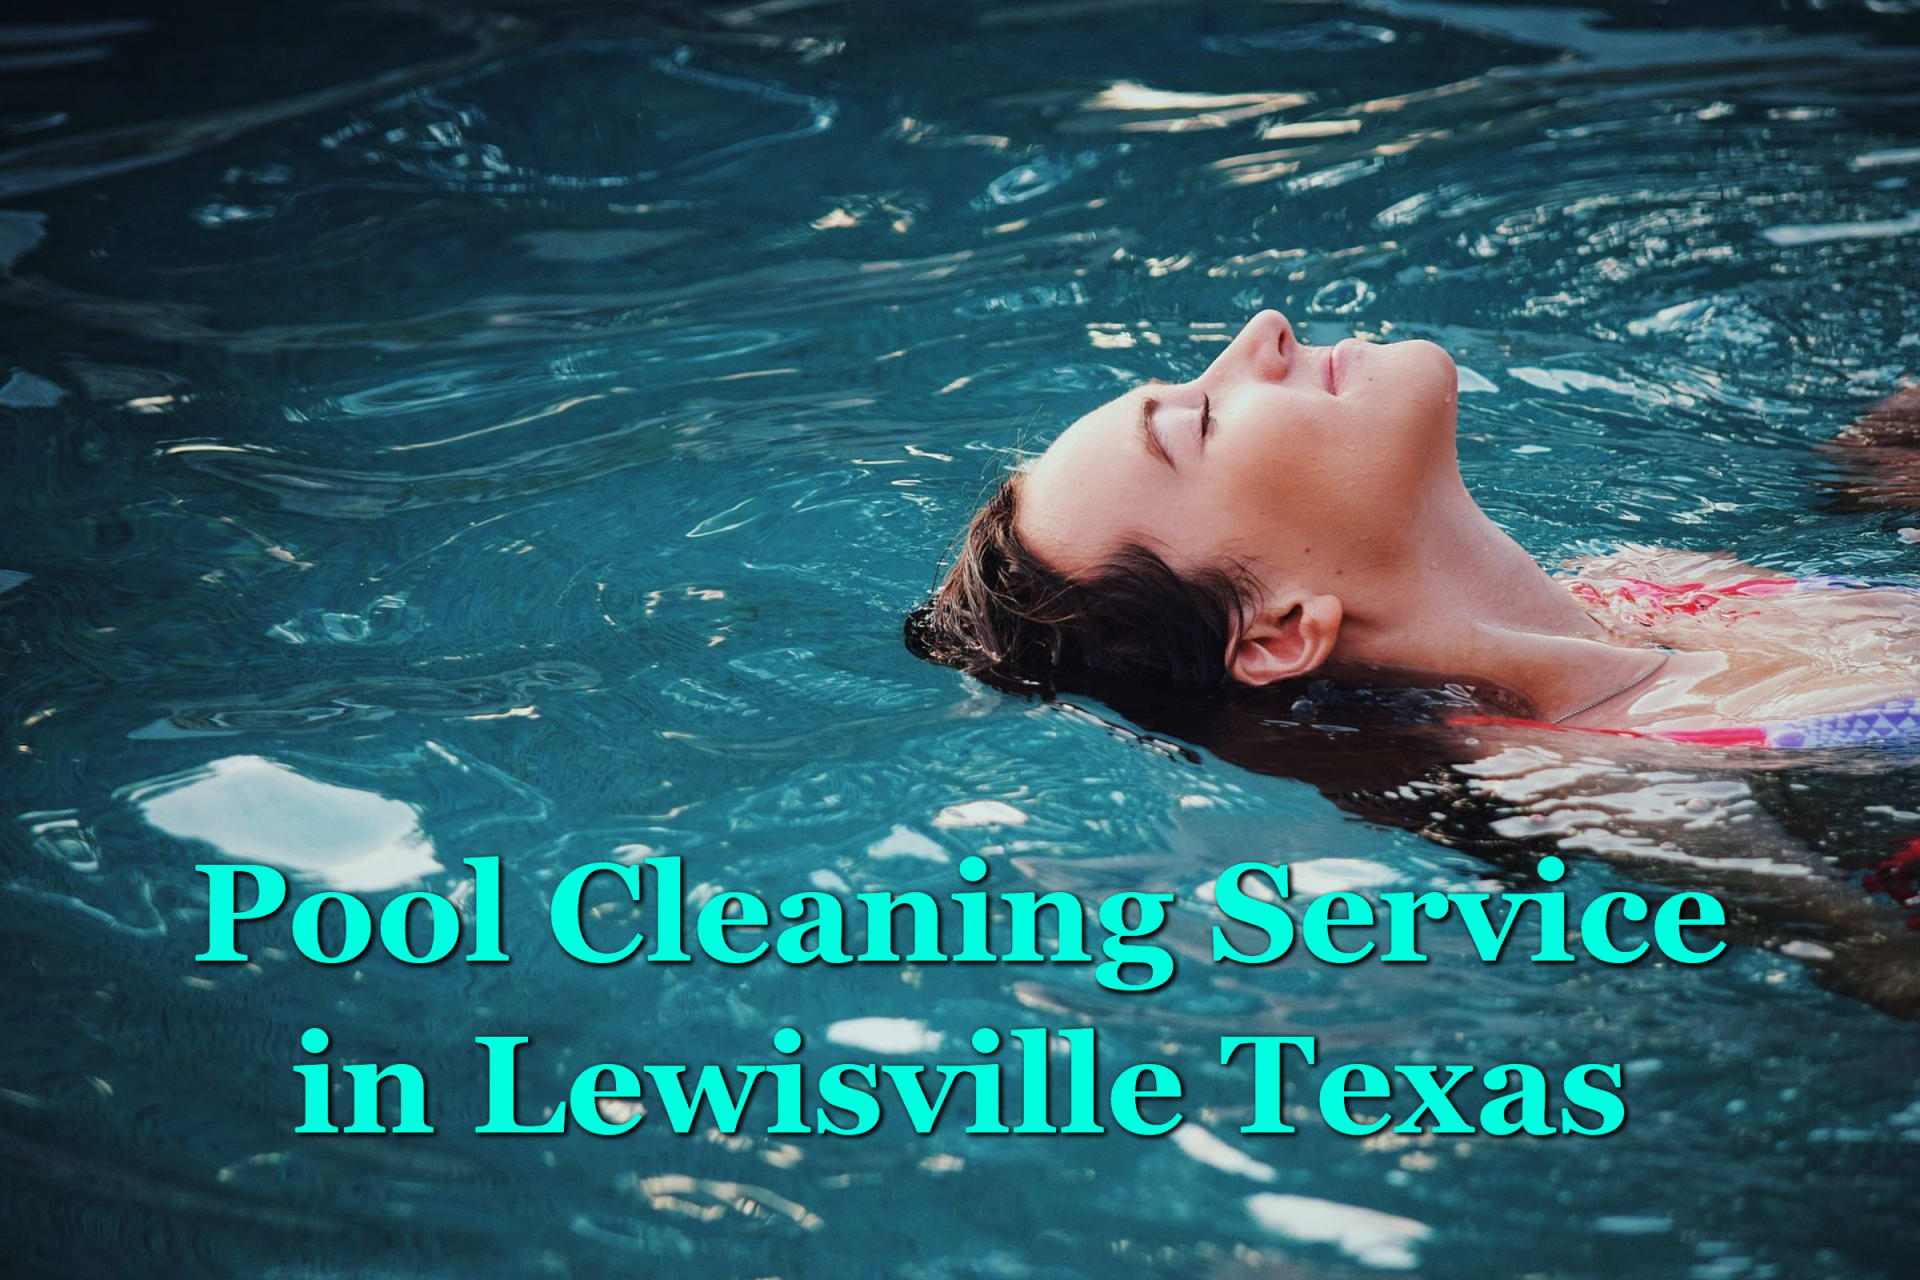 Woman swimming in her pool after receiving the best Pool Cleaning Service in Lewisville Texas